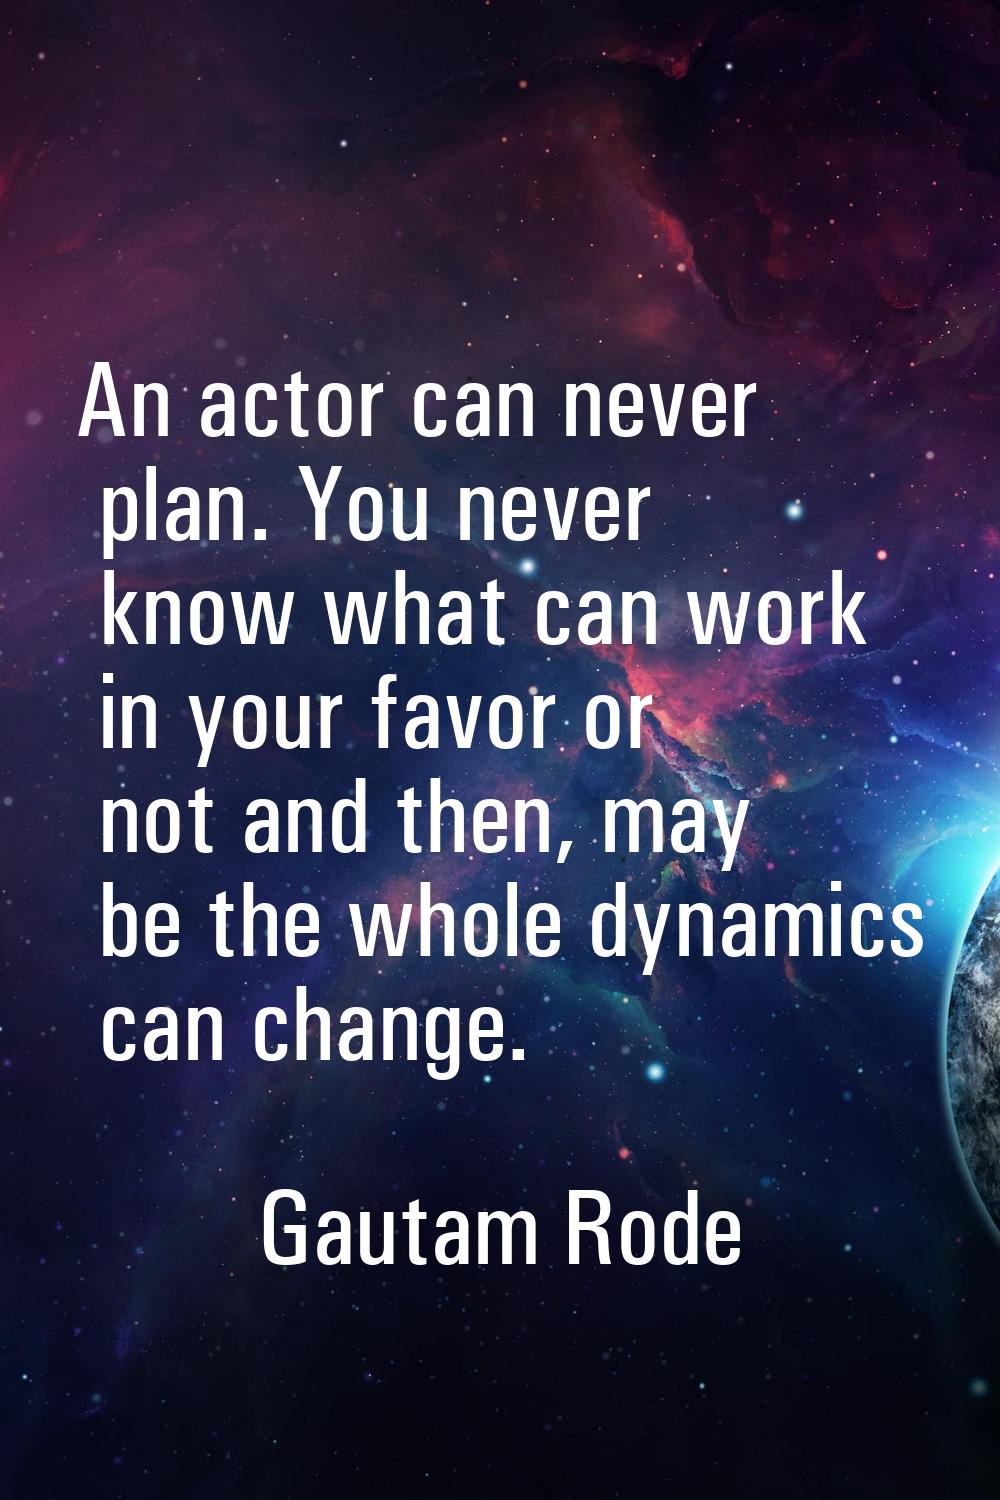 An actor can never plan. You never know what can work in your favor or not and then, may be the who